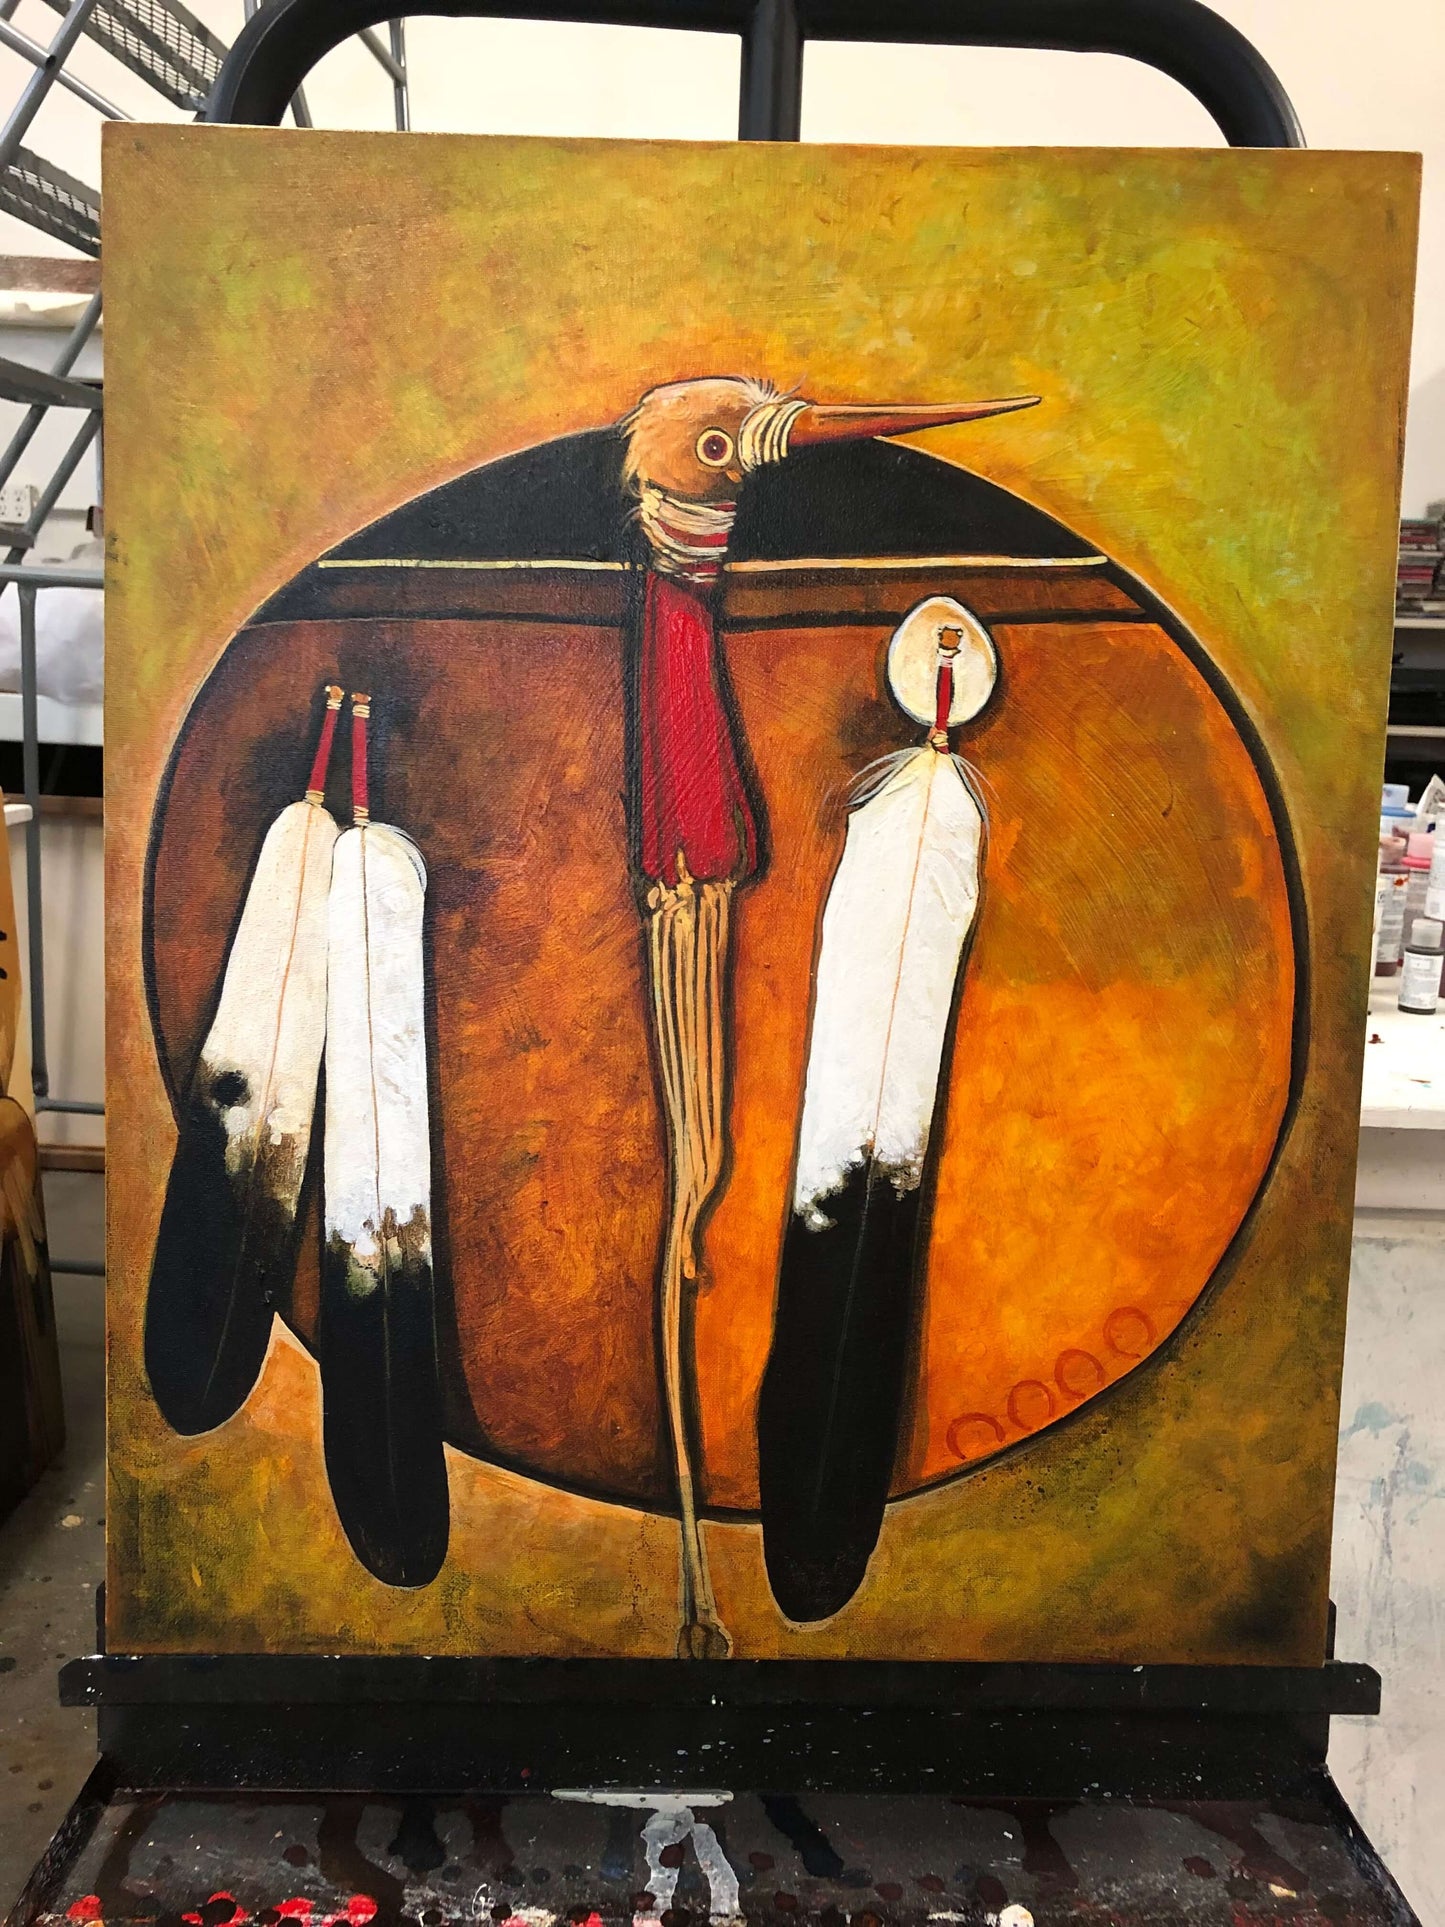 Red Crane Shield-Painting-Kevin Red Star-Sorrel Sky Gallery